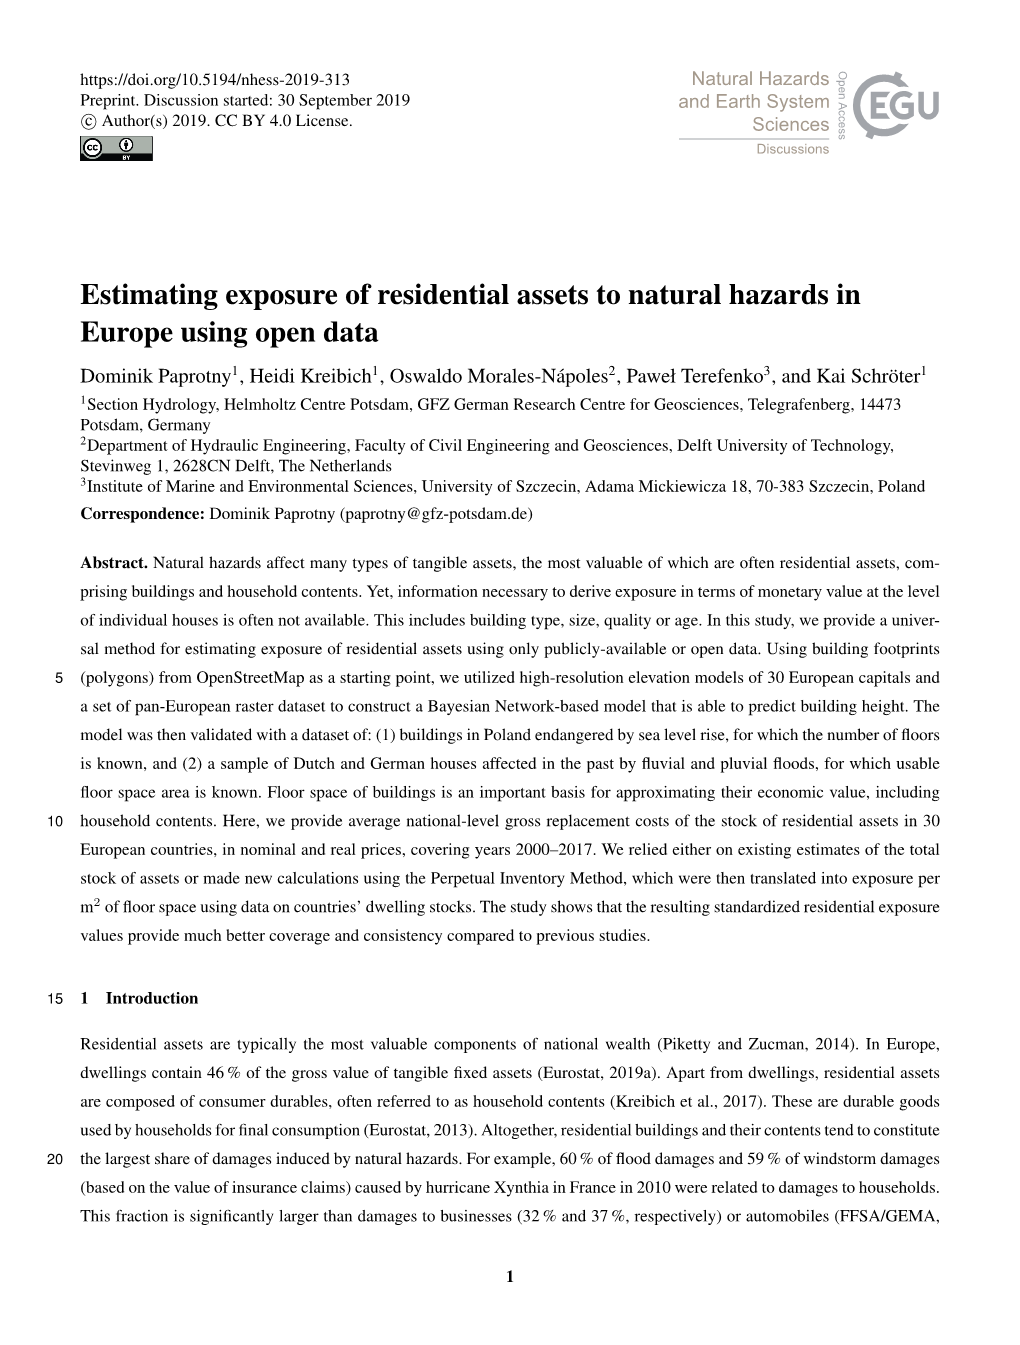 Estimating Exposure of Residential Assets to Natural Hazards in Europe Using Open Data